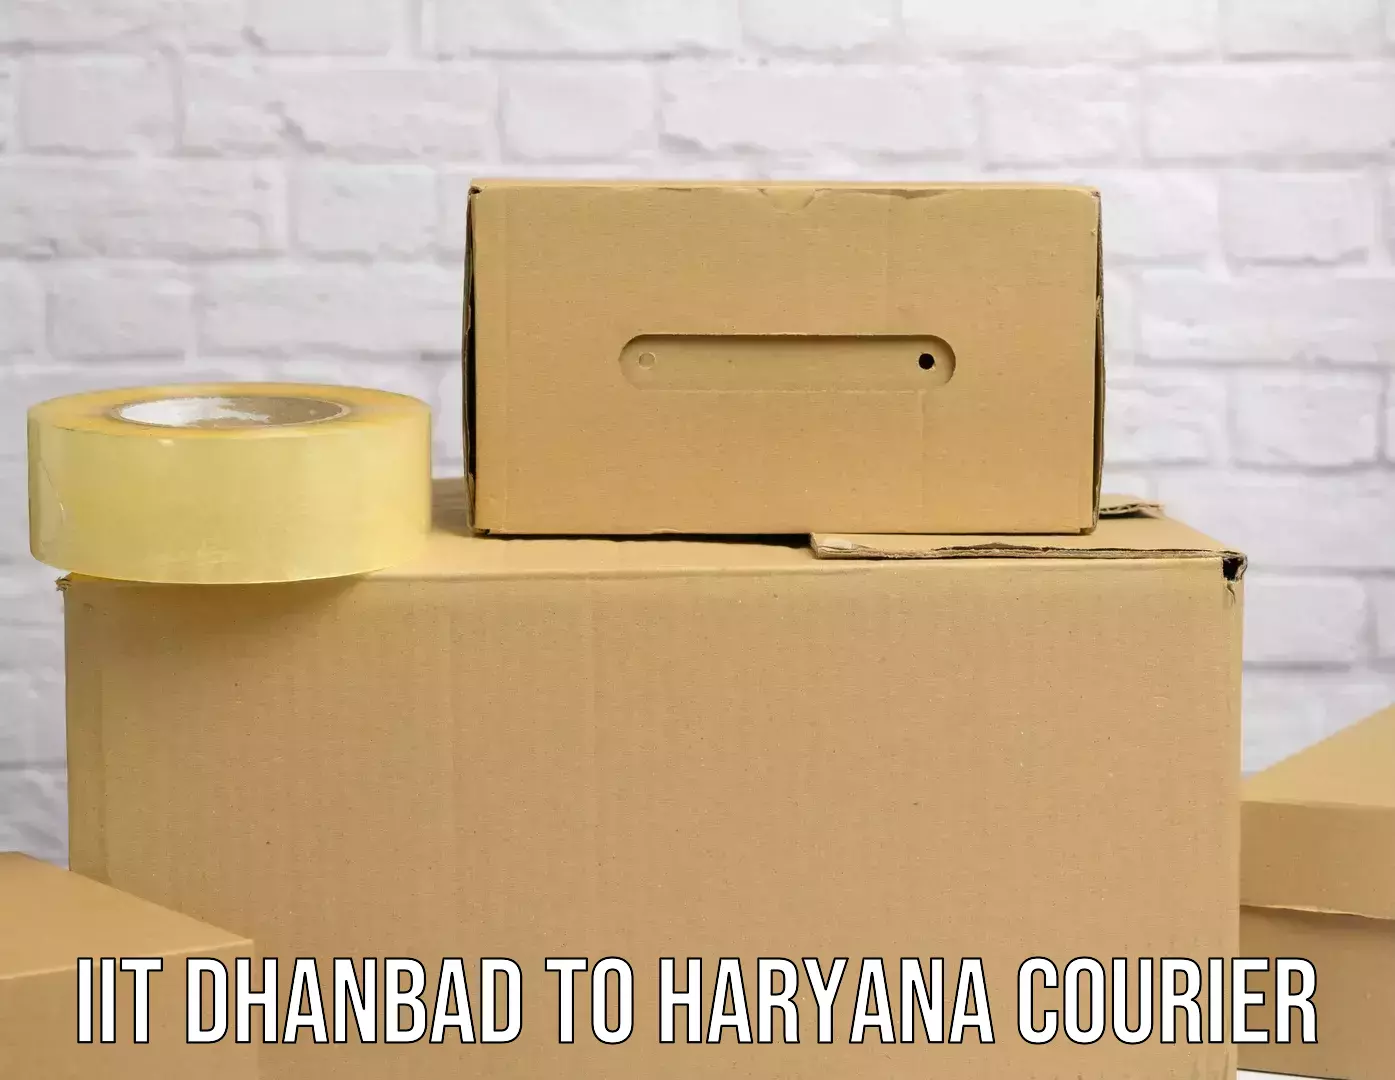 Global shipping solutions in IIT Dhanbad to Haryana